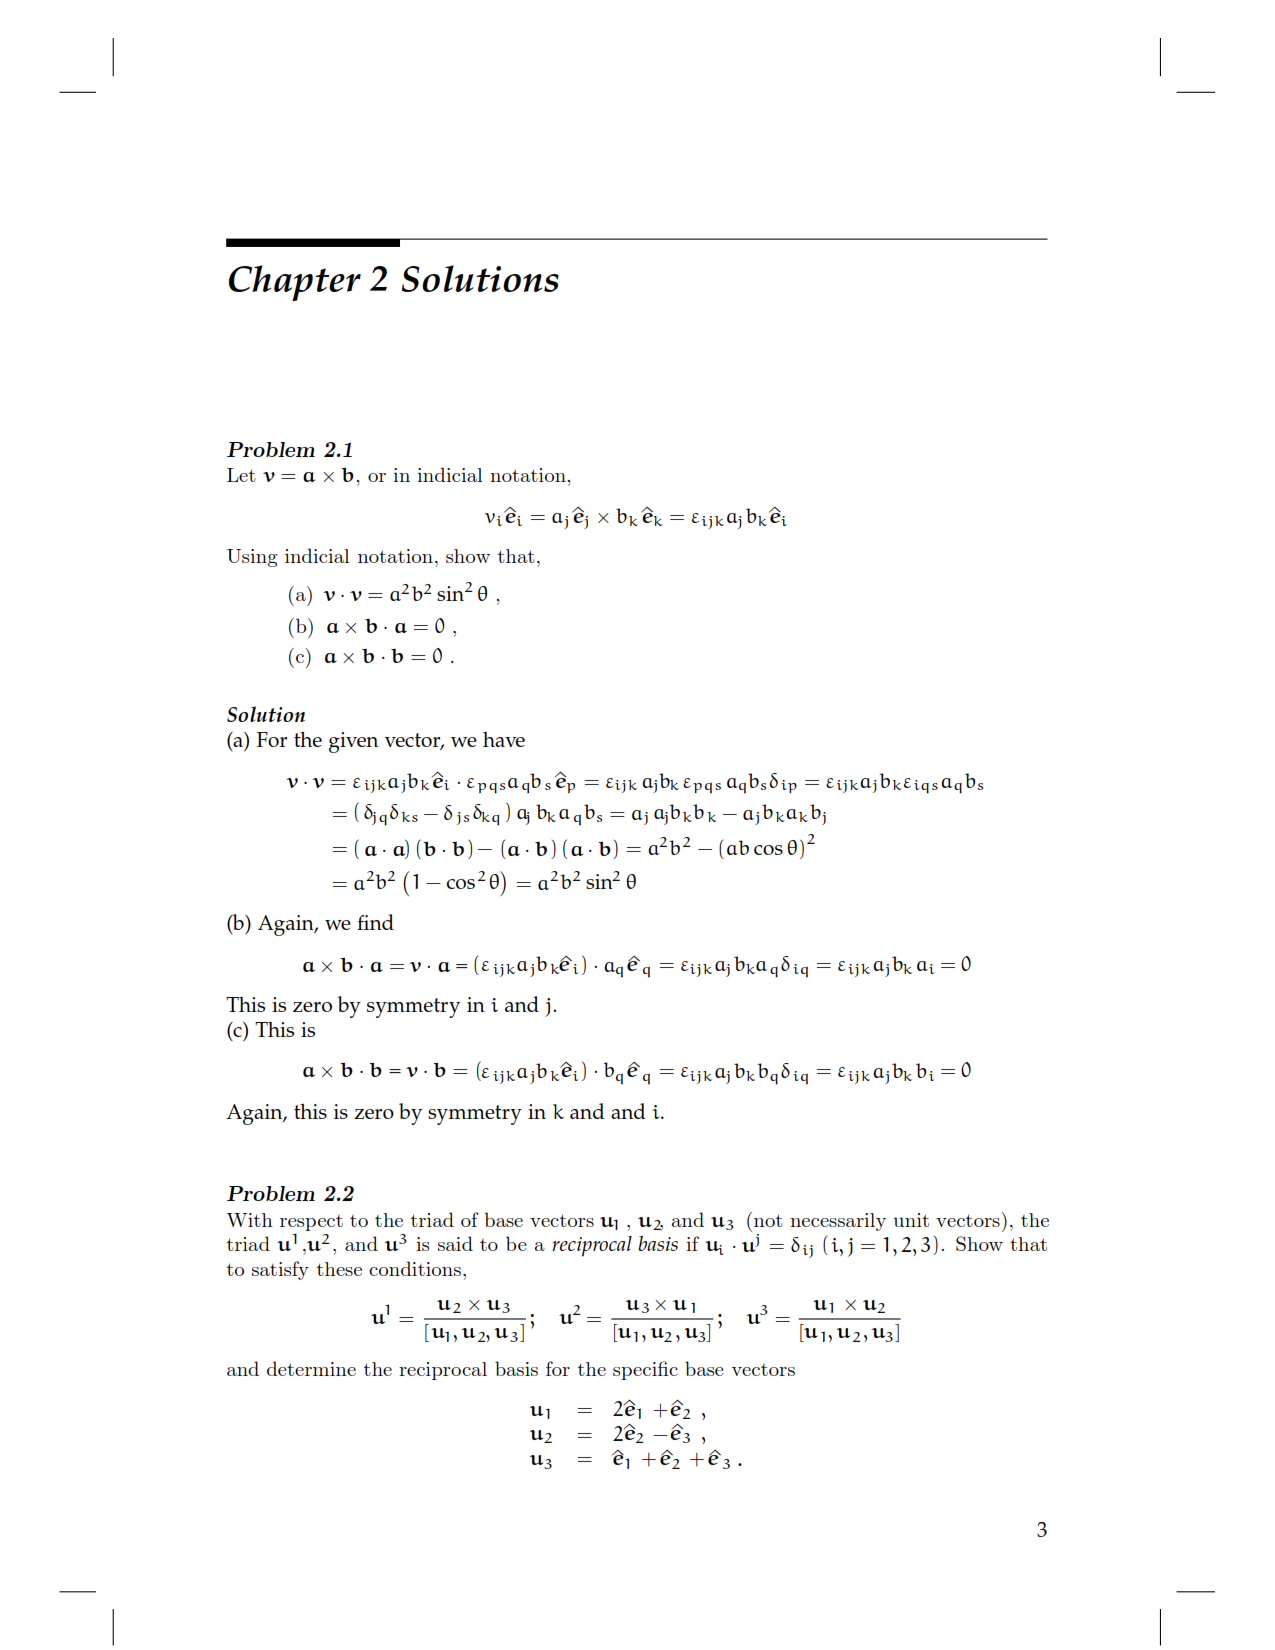 Download free continuum mechanics for engineers third ( 3rd ) & 4th edition Thomas Mase solution manual pdf | Giouemh solutions